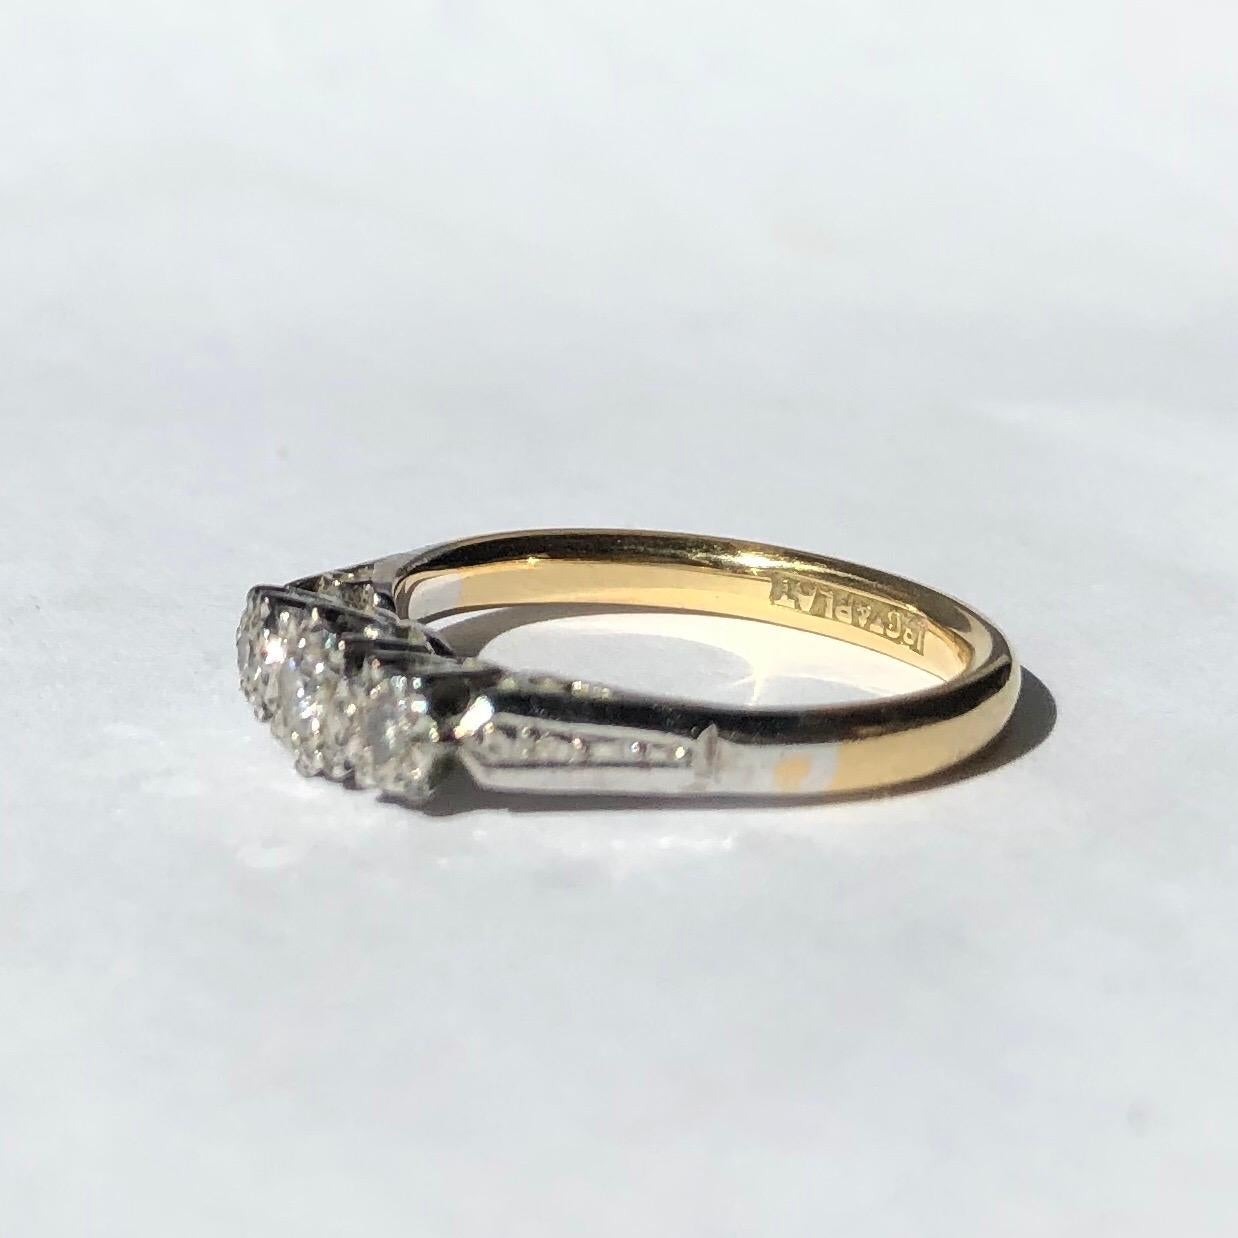 The three stones in this ring are set in illusion settings which make the diamonds appear larger. The diamonds total 20pts. The stones are set in platinum and the rest is made with 18carat gold. 

Ring Size: J 1/2 or 5 
Height Off Finger: